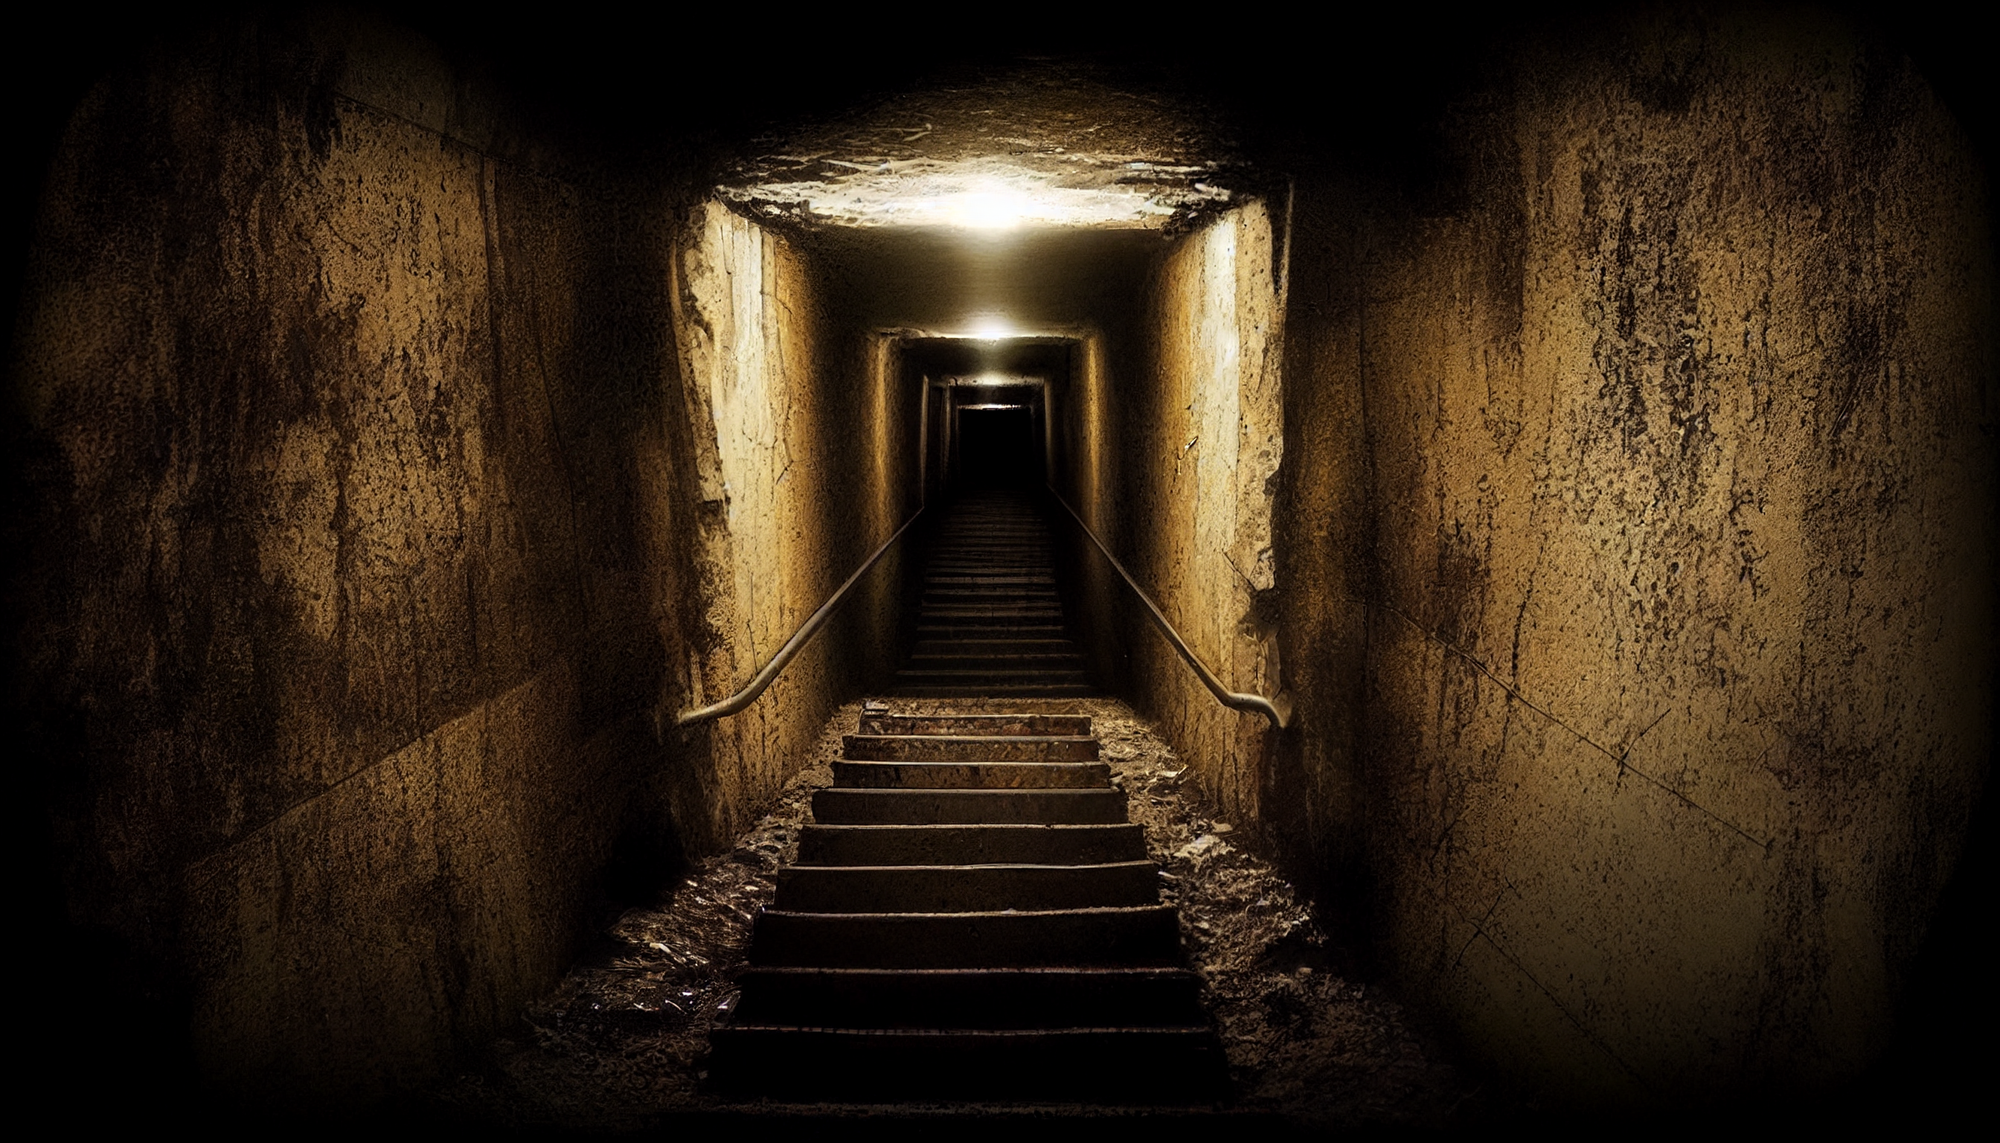 Deep underground basement, corridor and steps down into dark unknown, single soft light, brown earth crumbling walls